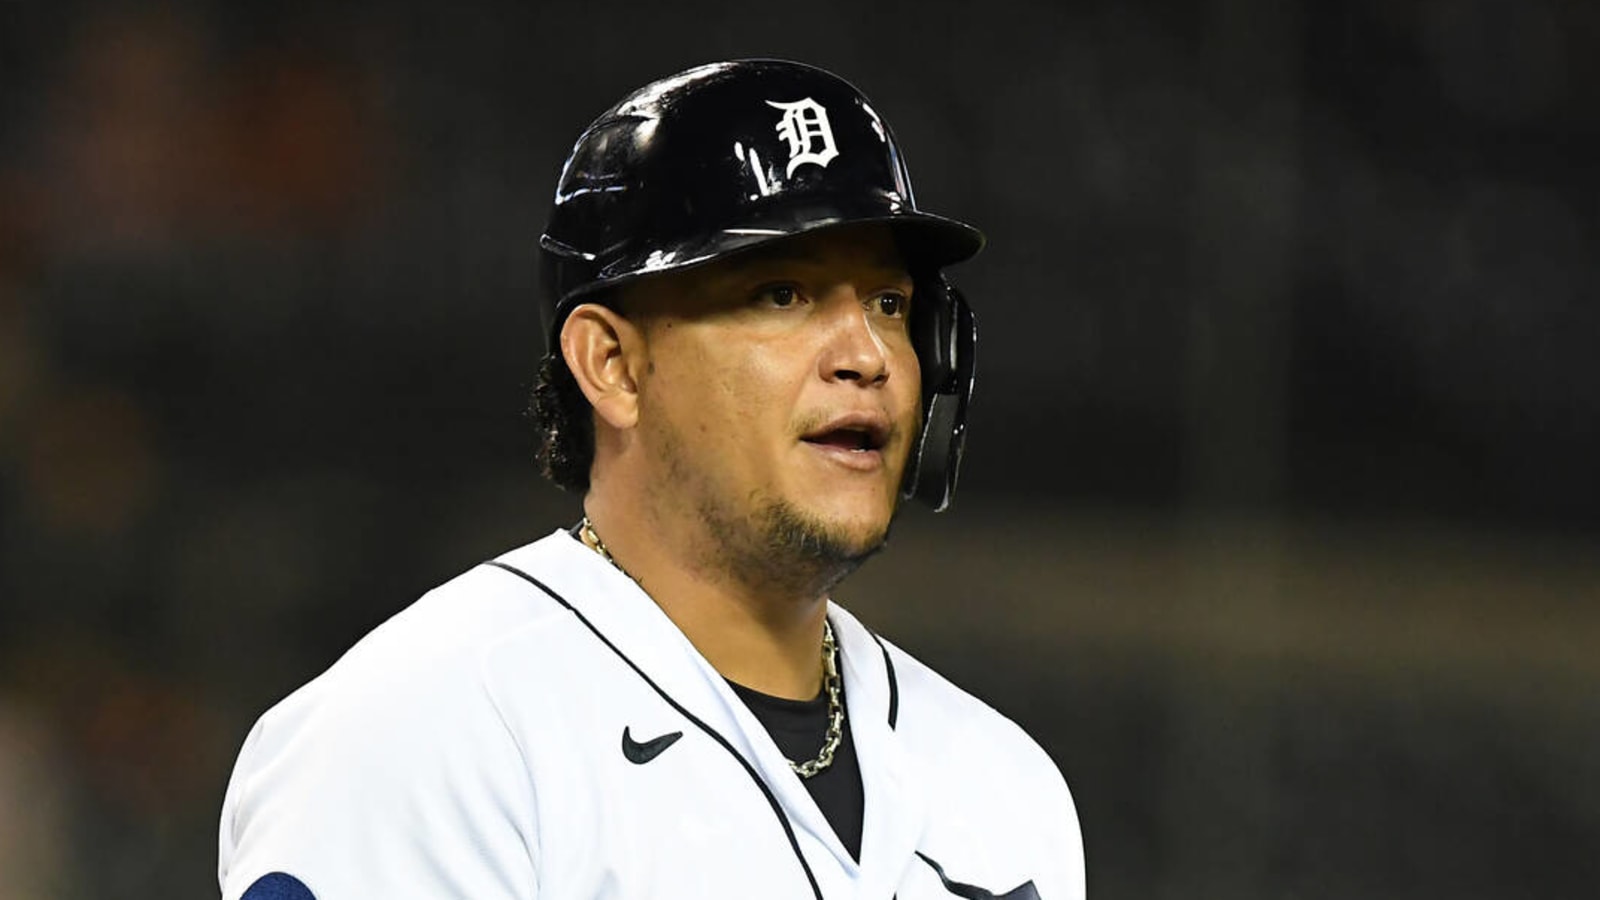 An offseason outlook for the Detroit Tigers